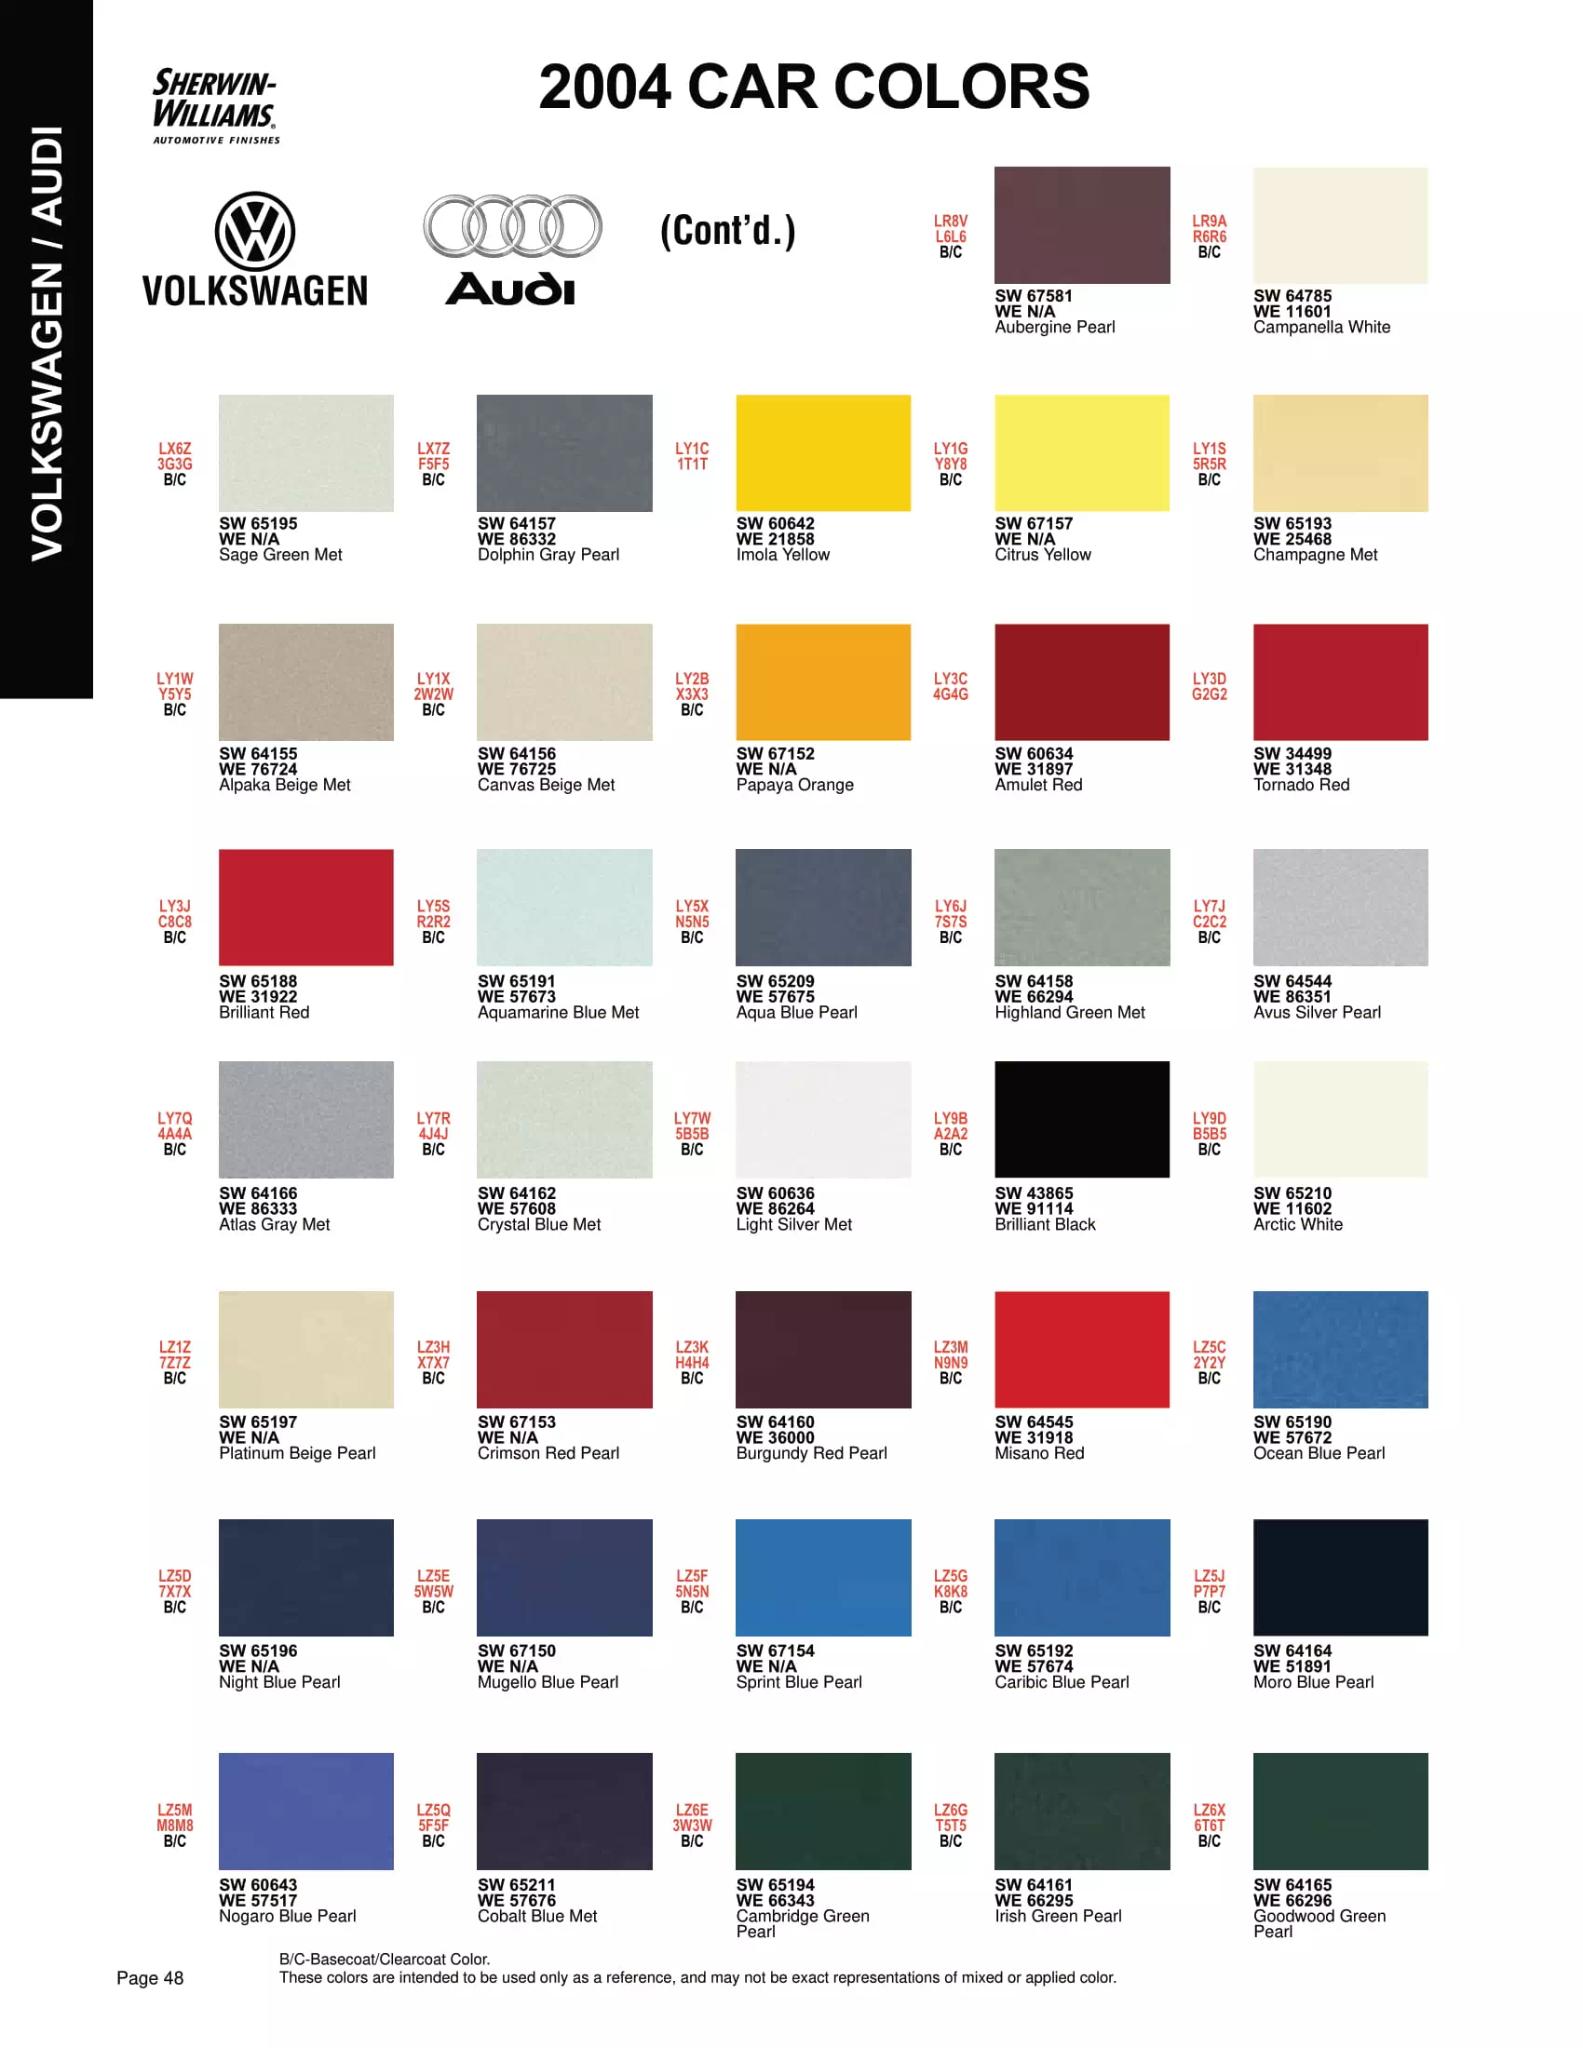 2004 Volkswagen Group Paint Codes Color Charts, 53% OFF